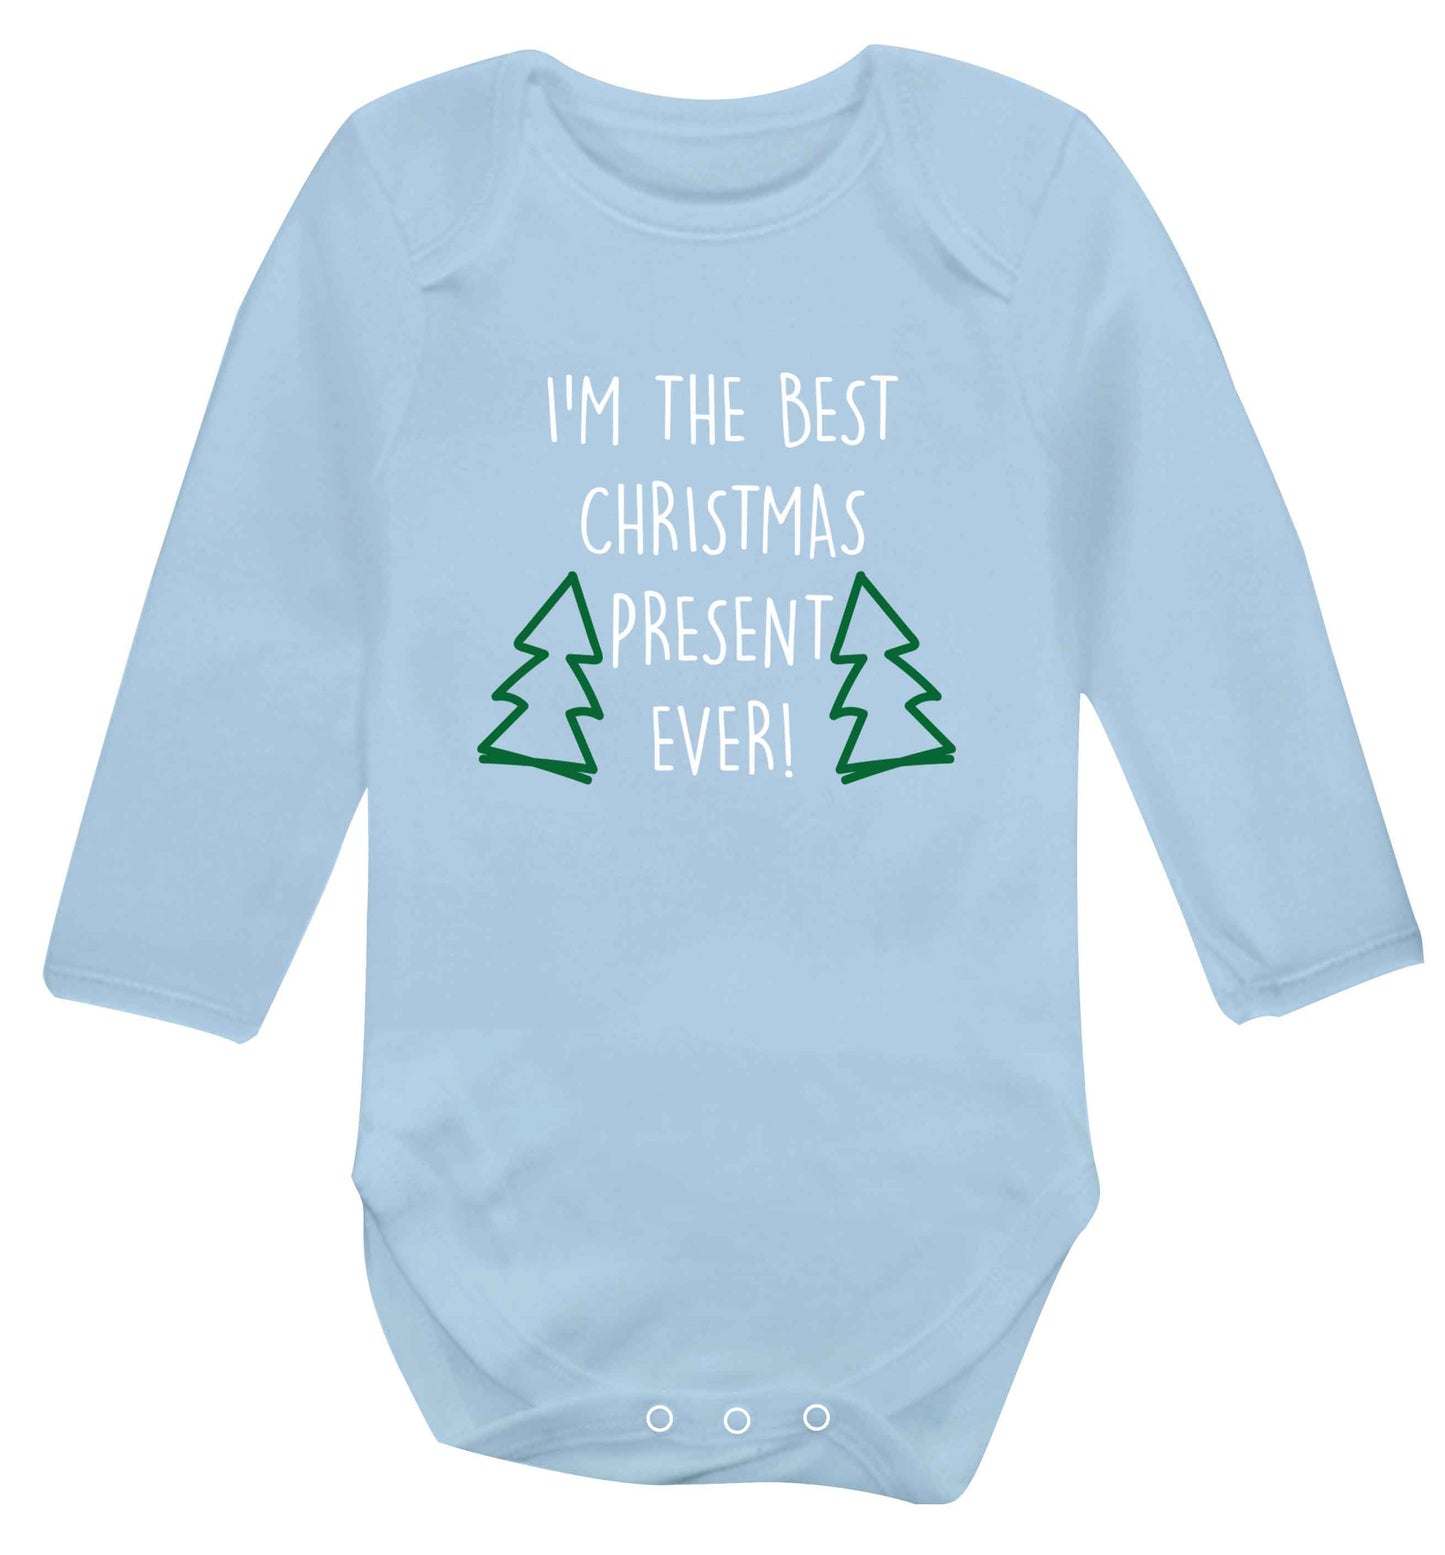 I'm the best Christmas present ever baby vest long sleeved pale blue 6-12 months